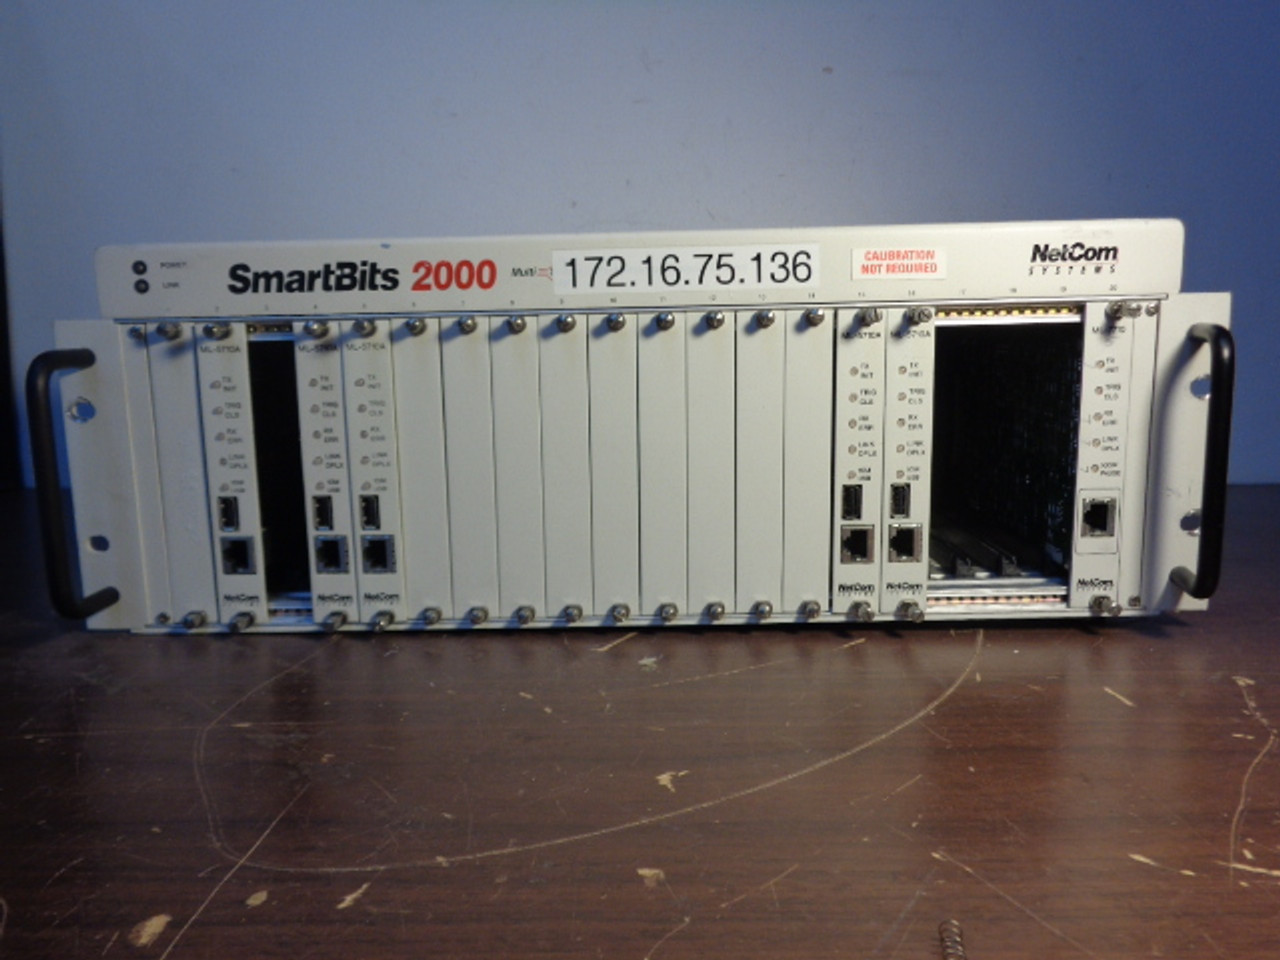 Netcom Systems Spirent Smartbits SMB-2000 with (6) Modules